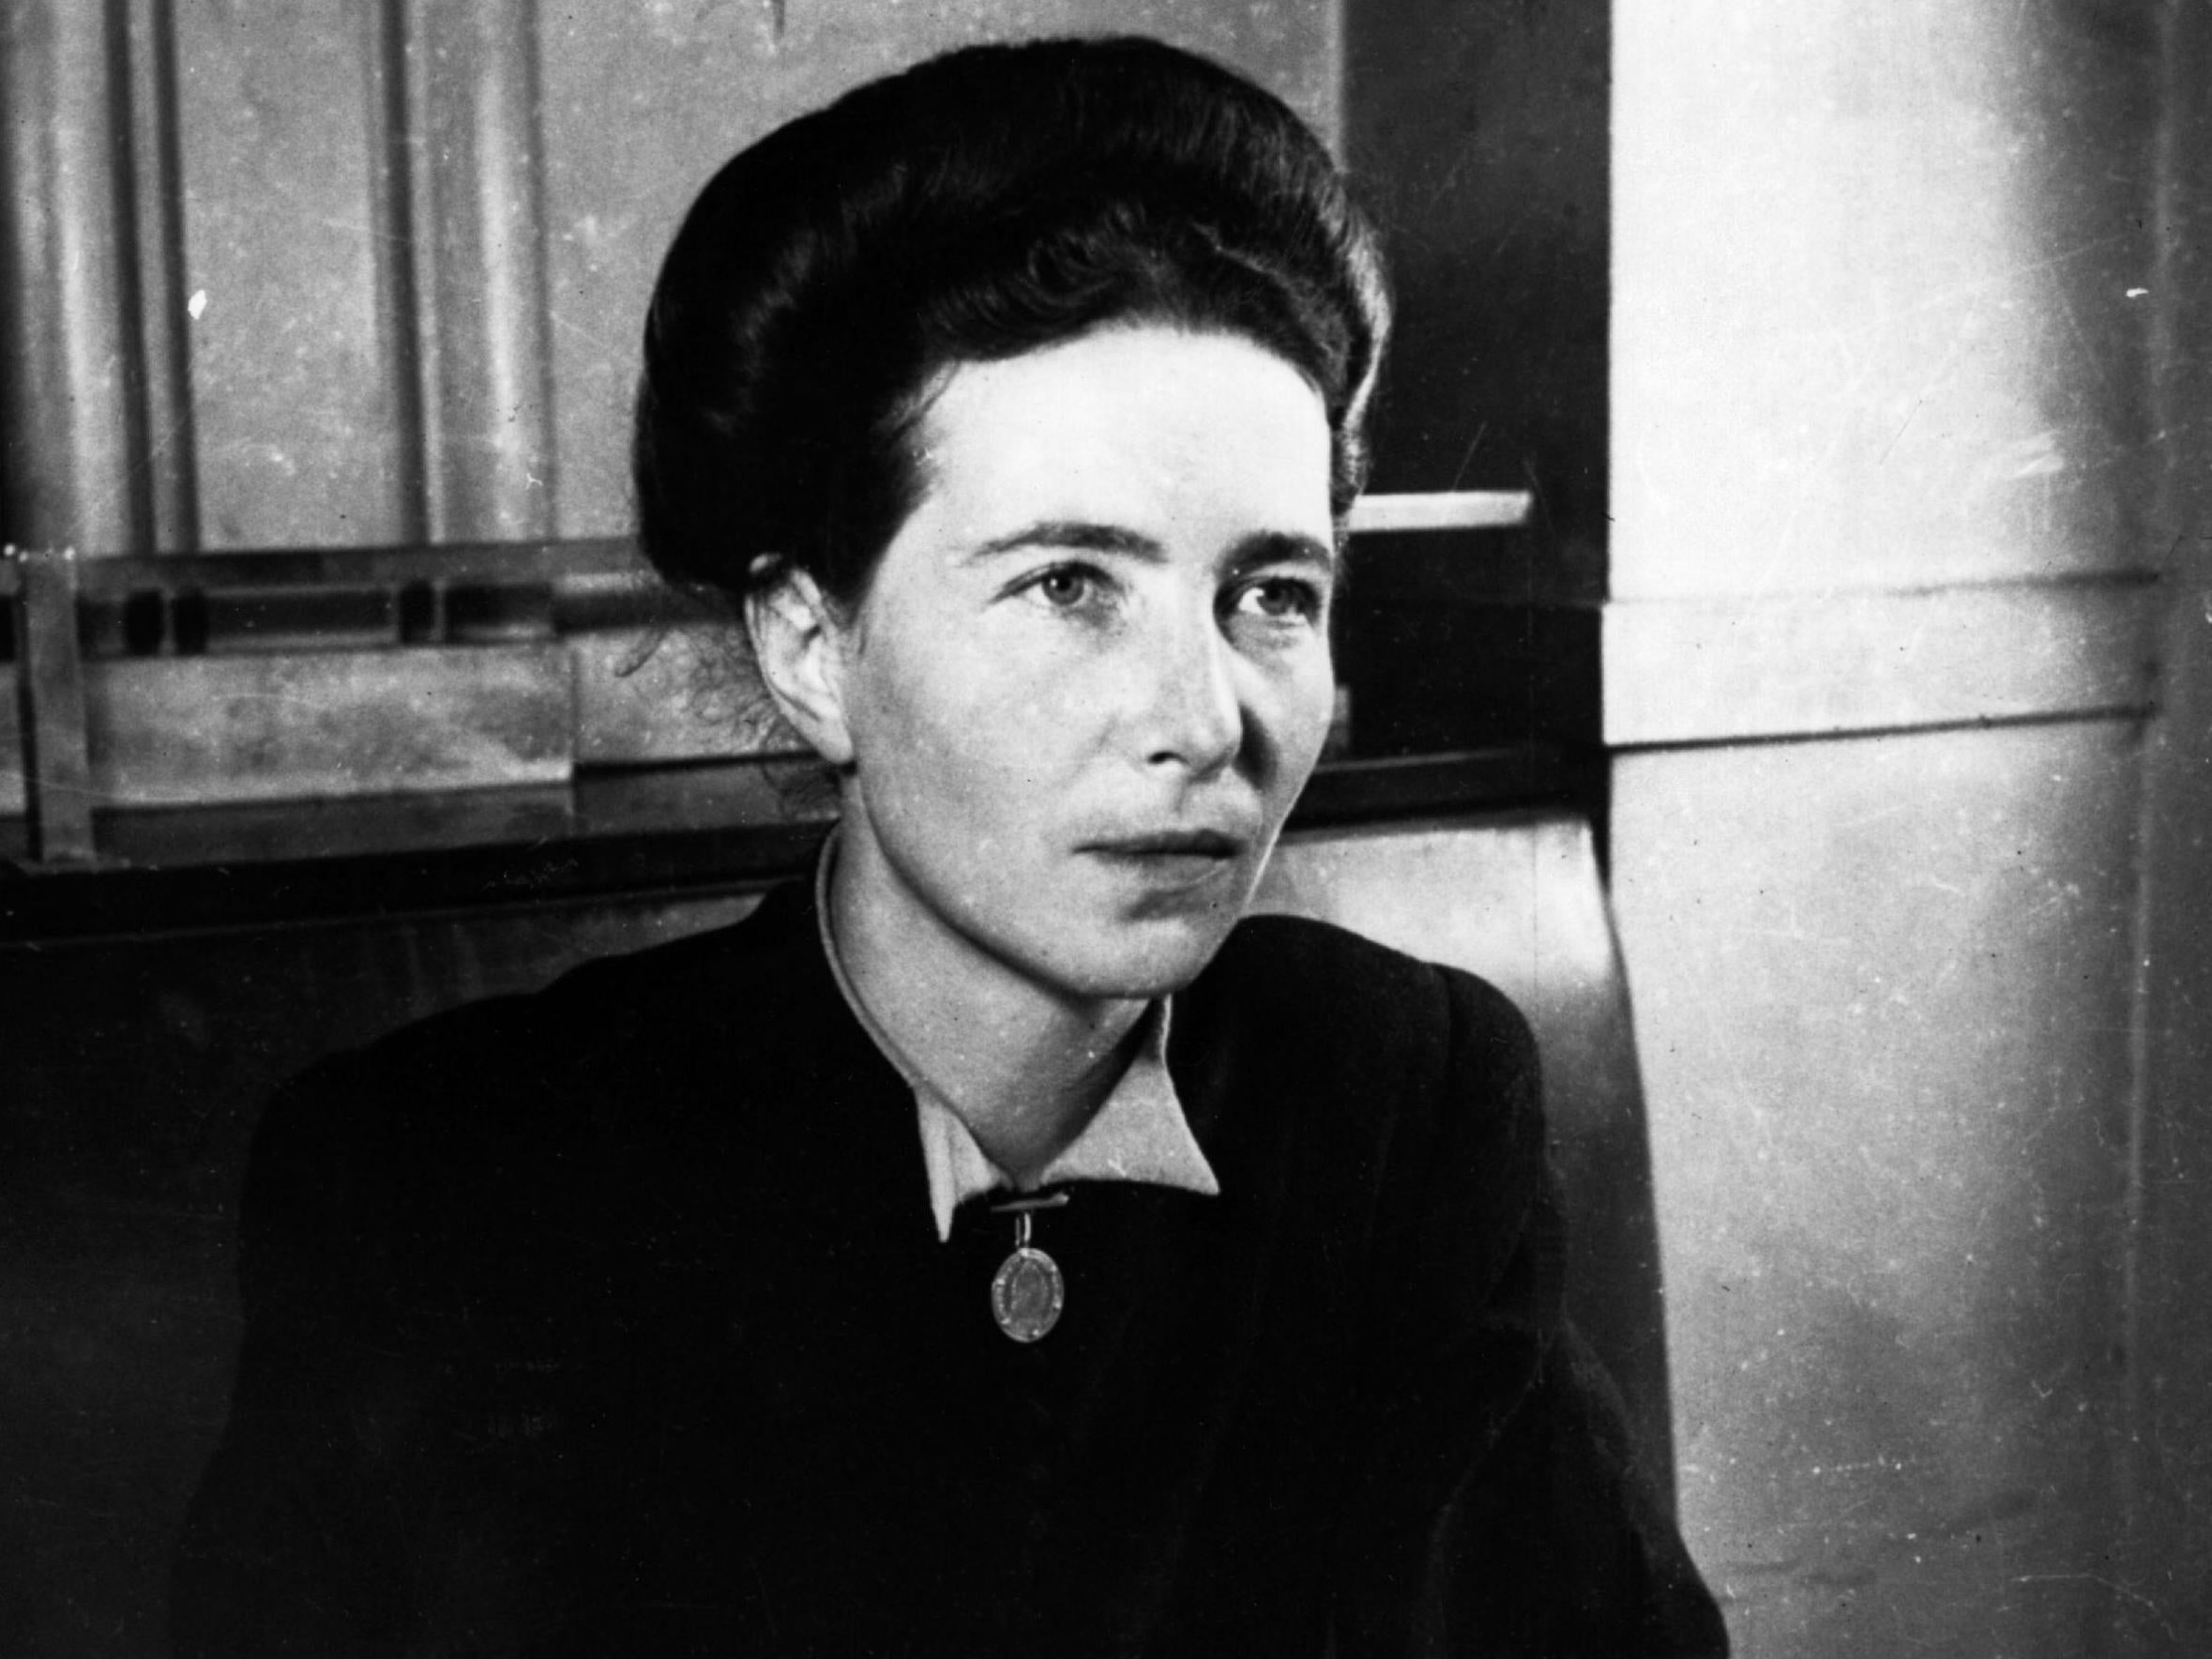 Simone de Beauvoir's semi-autobiographical novel was supposedly considered 'too intimate' to publish